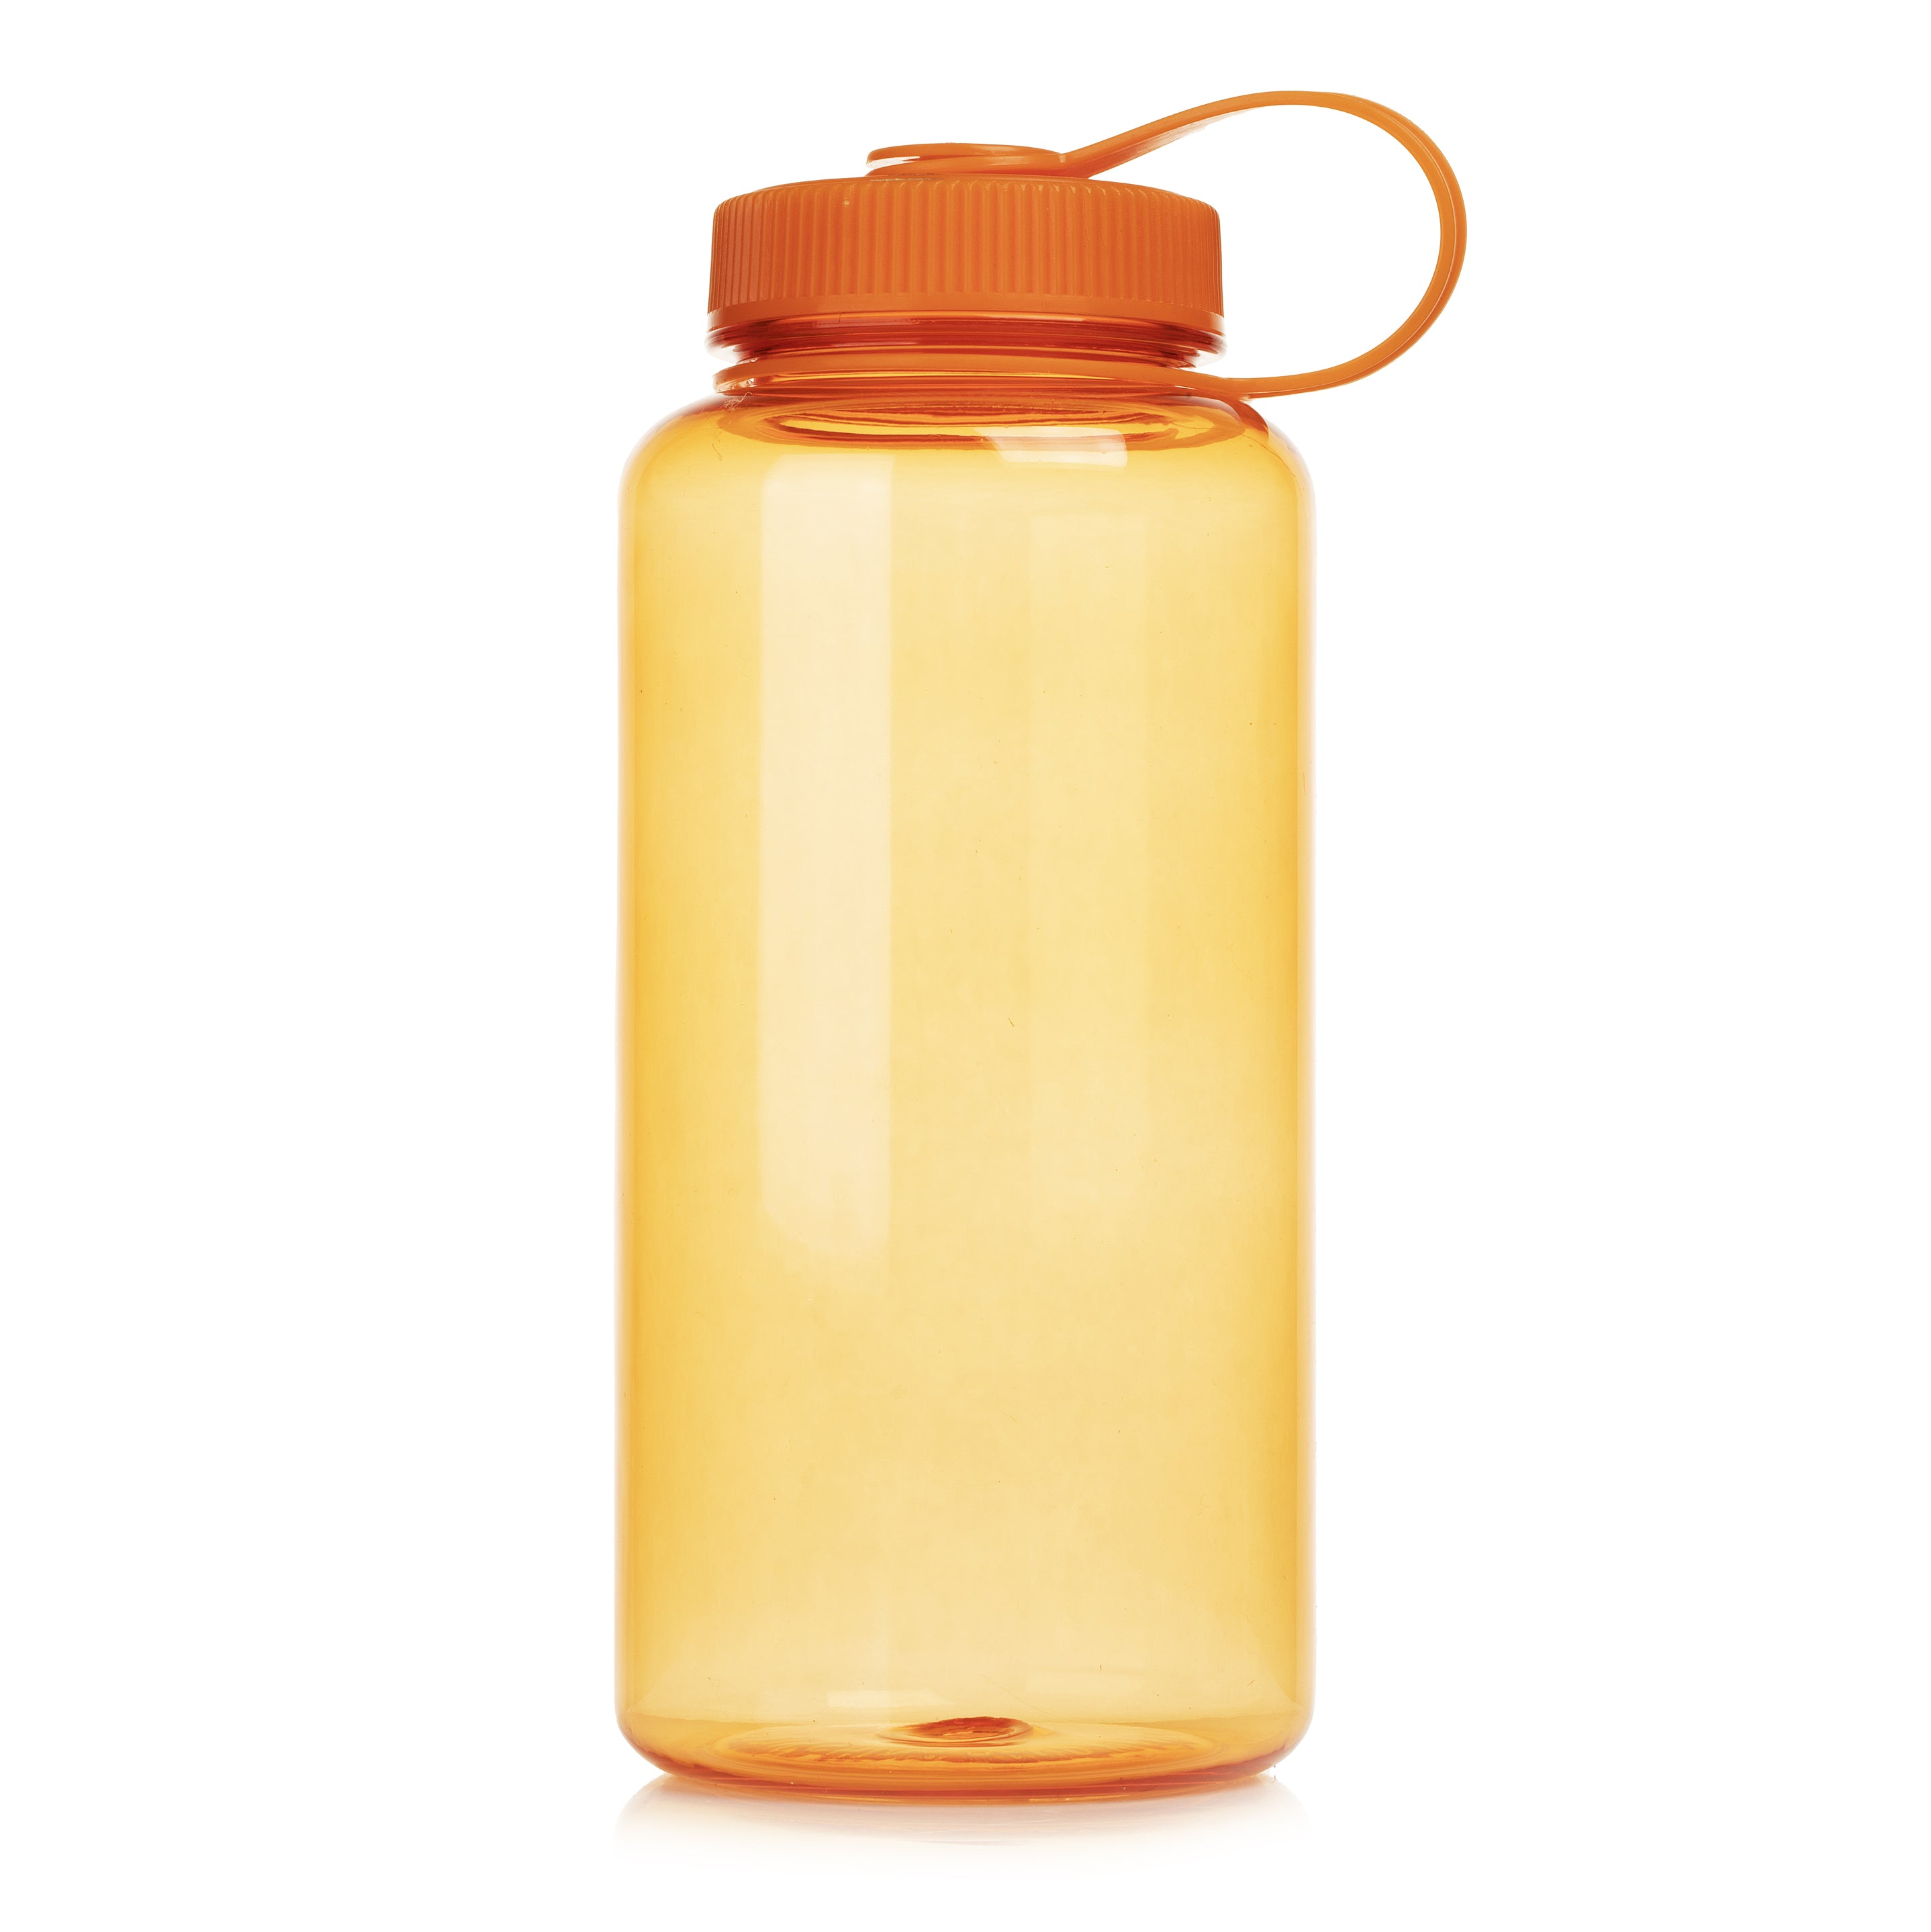 Safe Plastic Water Bottle - Large Opening - Fill with Your Shoebox Items!